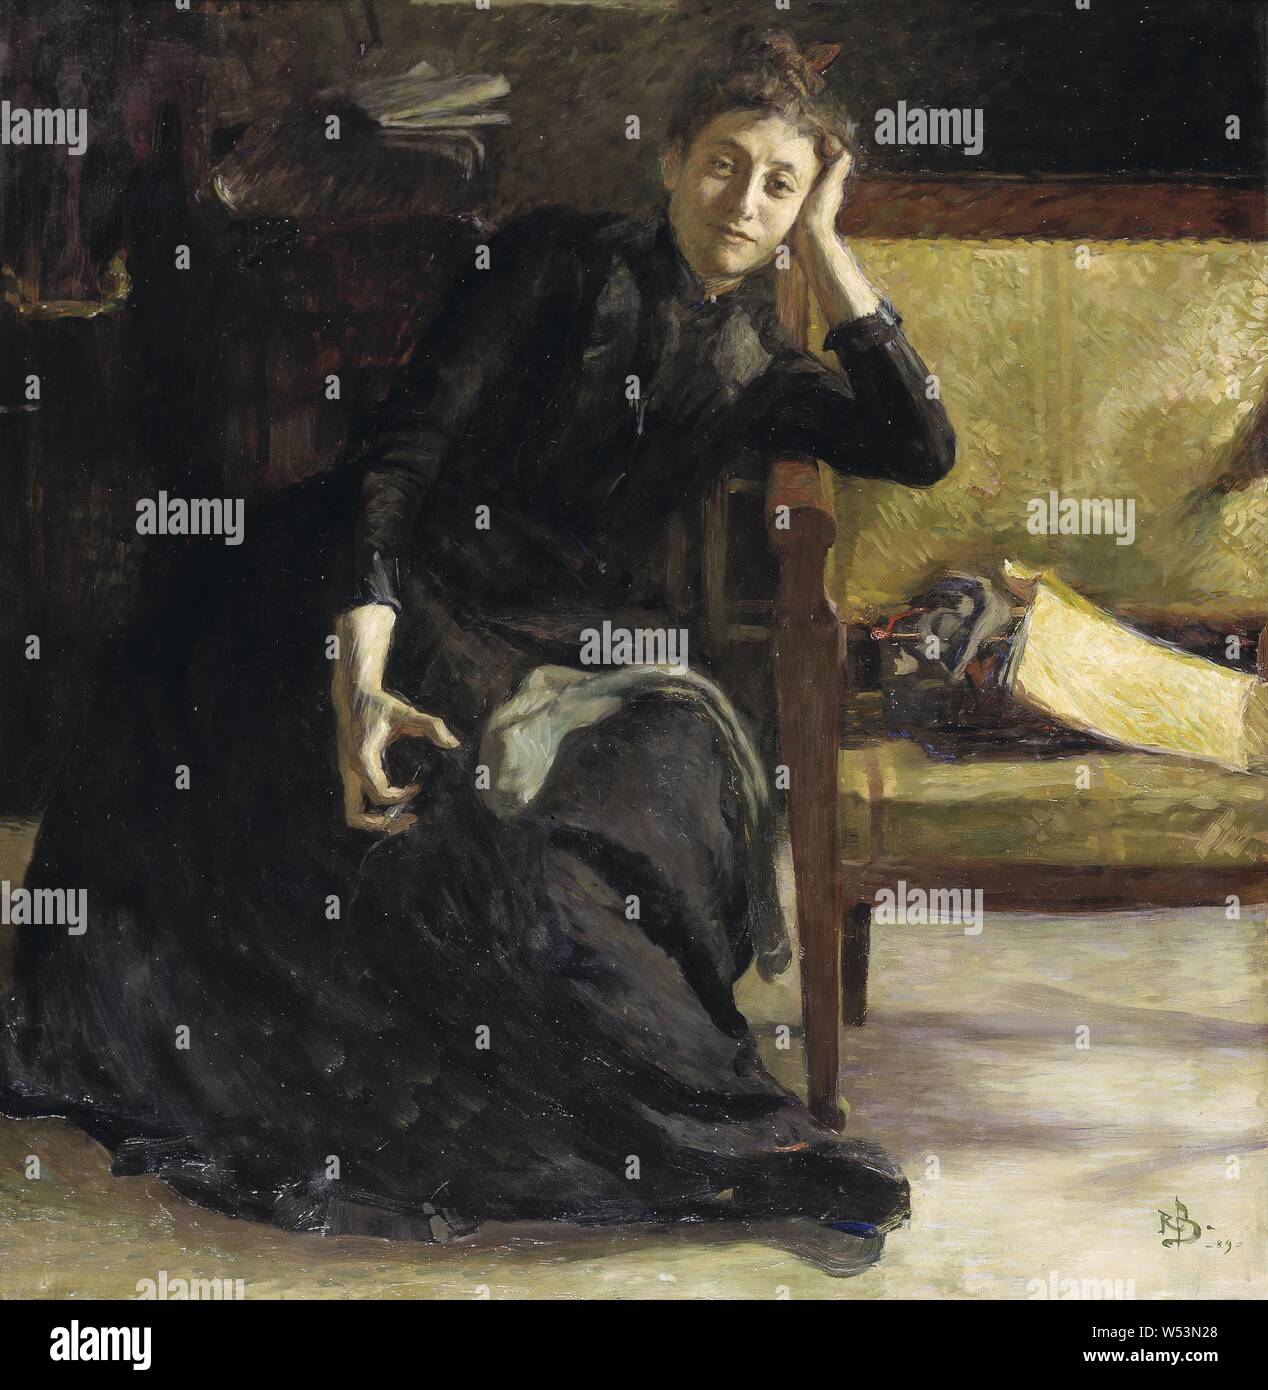 Richard Bergh, Eva Bonnier, The artist Eva Bonnier English, Artist Eva Bonnier, painting, 1889, Oil on canvas, Height, 123 cm (48.4 inches), Width, 120 cm (47.2 inches), Signed, RB, - 89 - Stock Photo